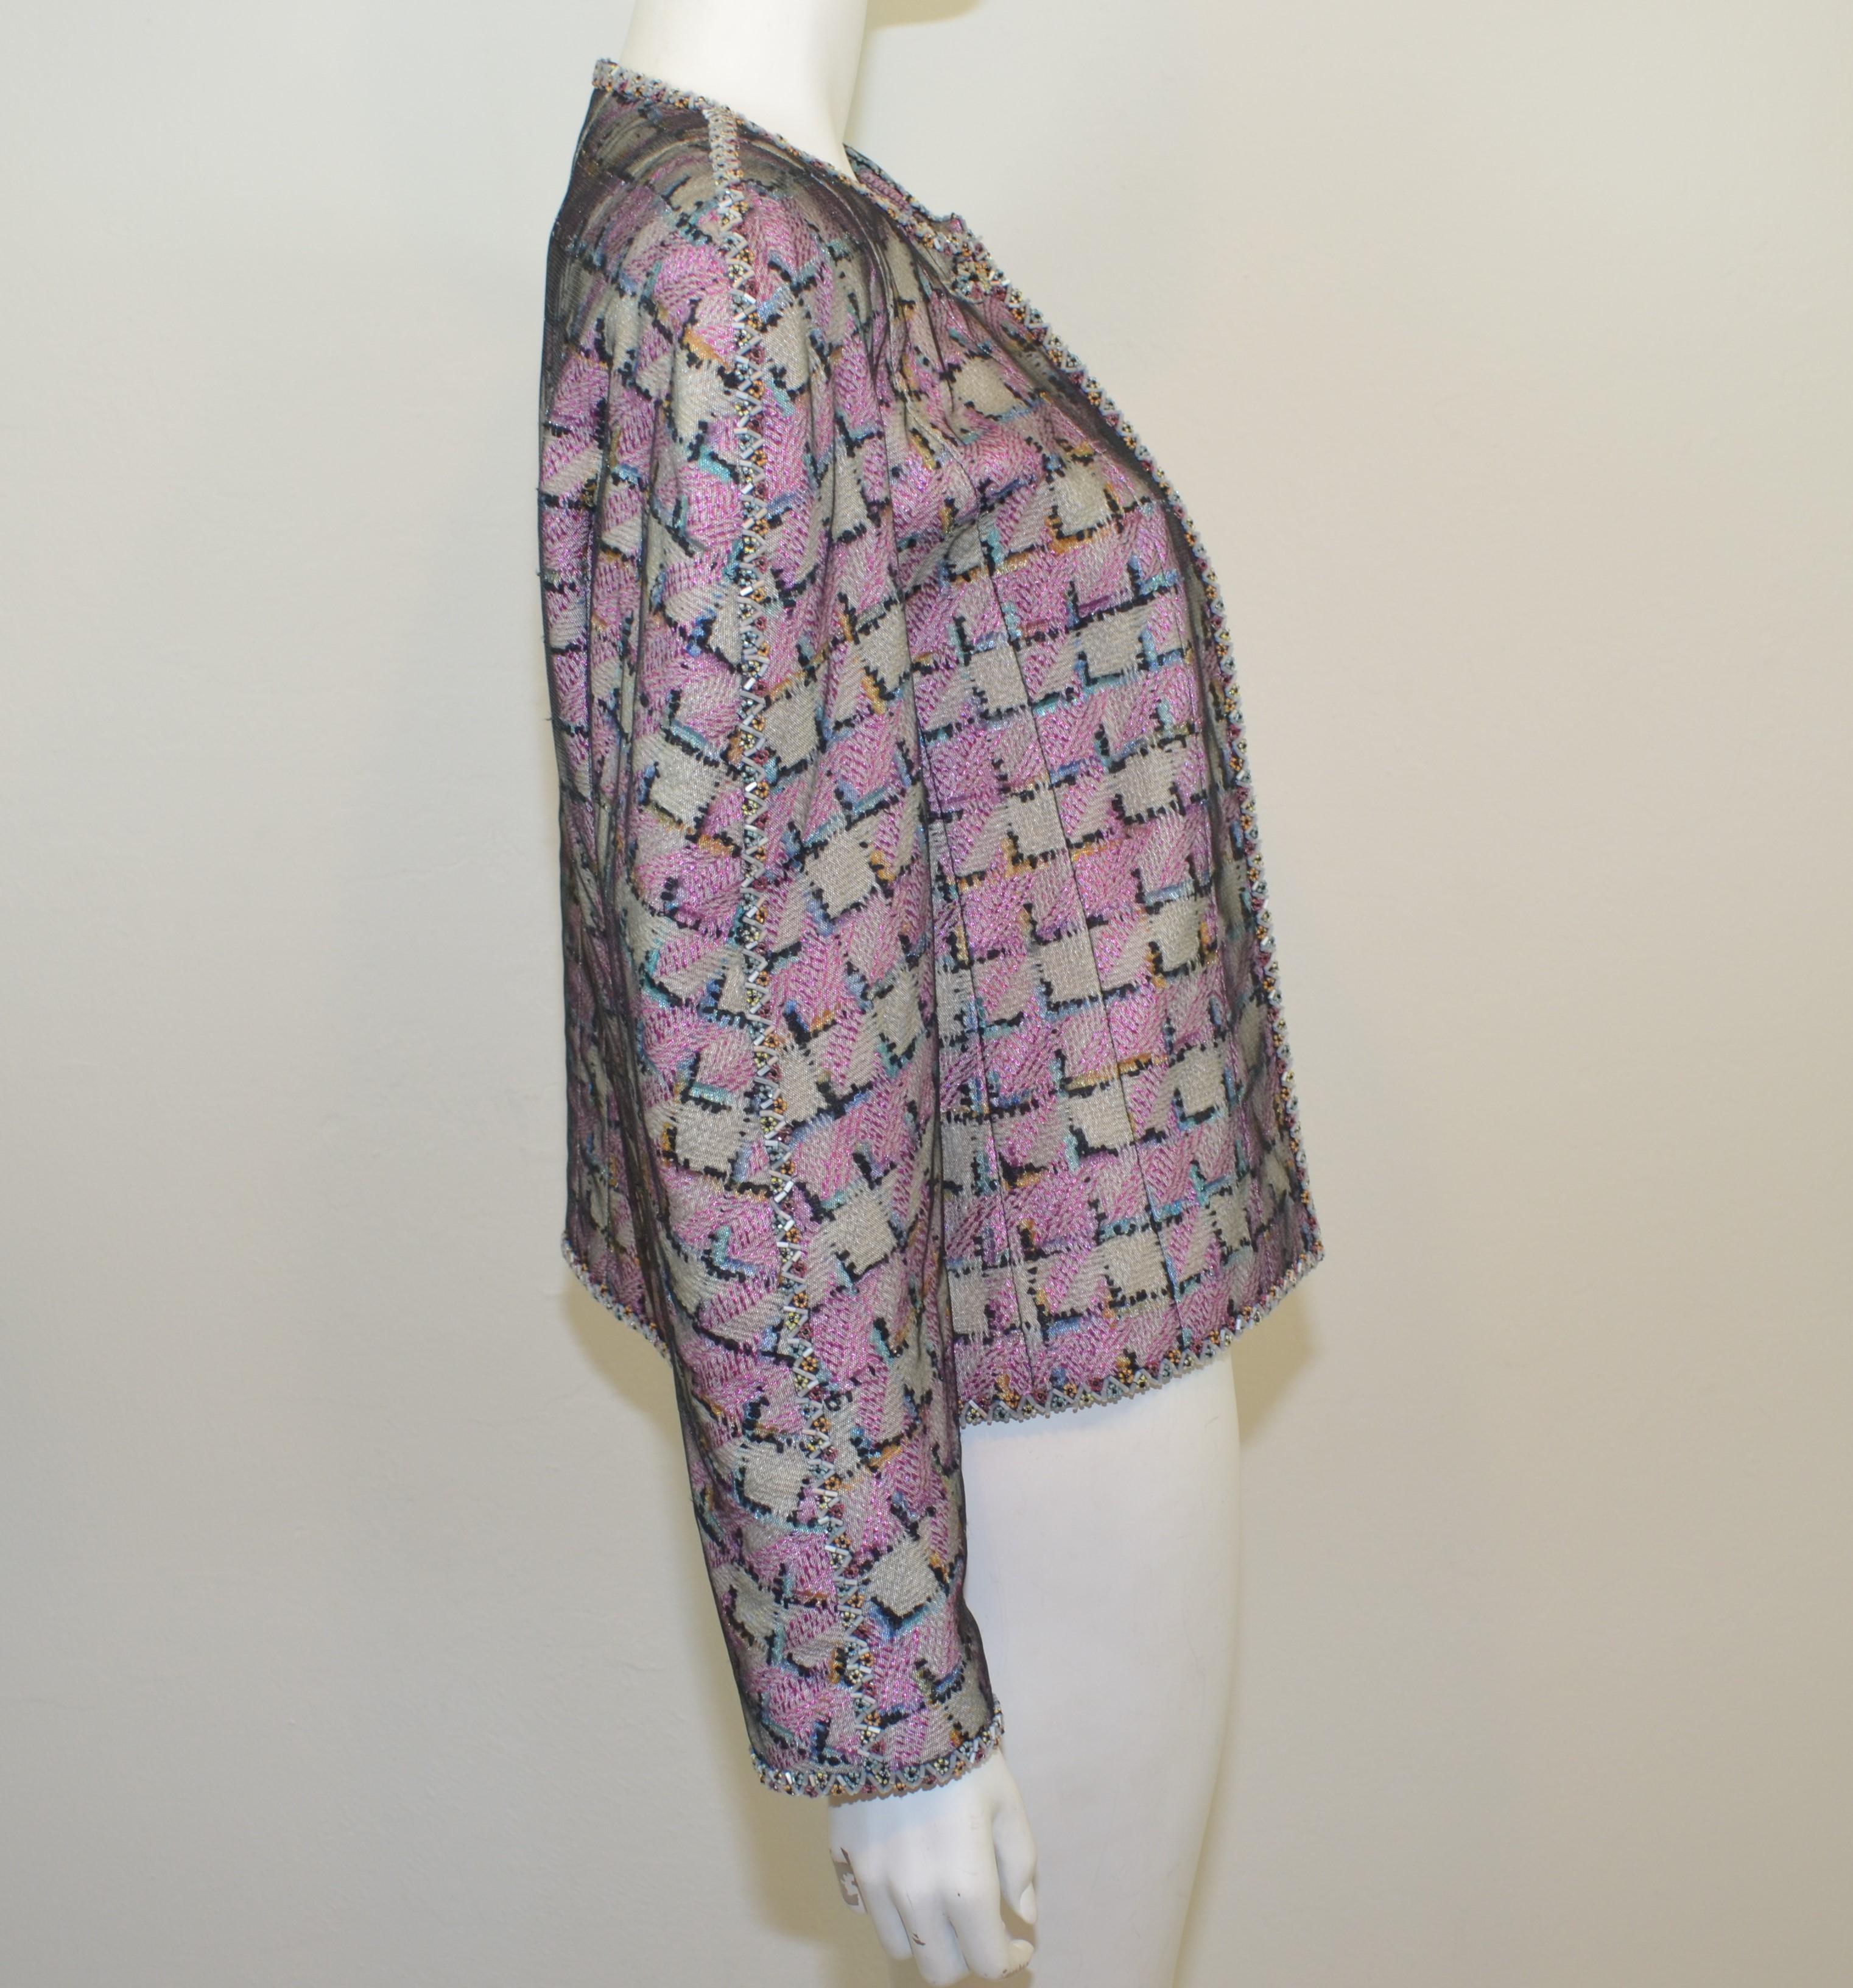 1998 C Chanel Multicolor Embellished Jacket with Mesh Overlay For Sale 2